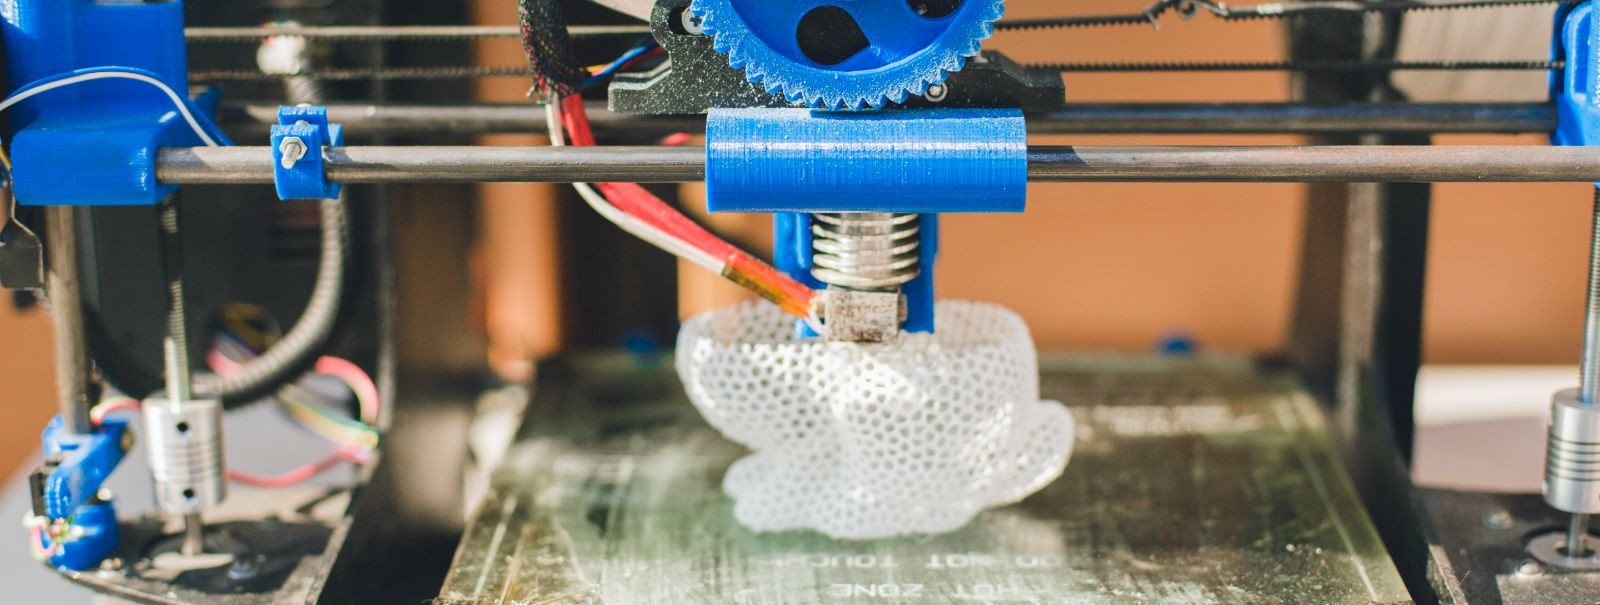 3D printing, also known as additive manufacturing, has revolutionized the way we create objects, from simple models to complex functional parts. The heart of th